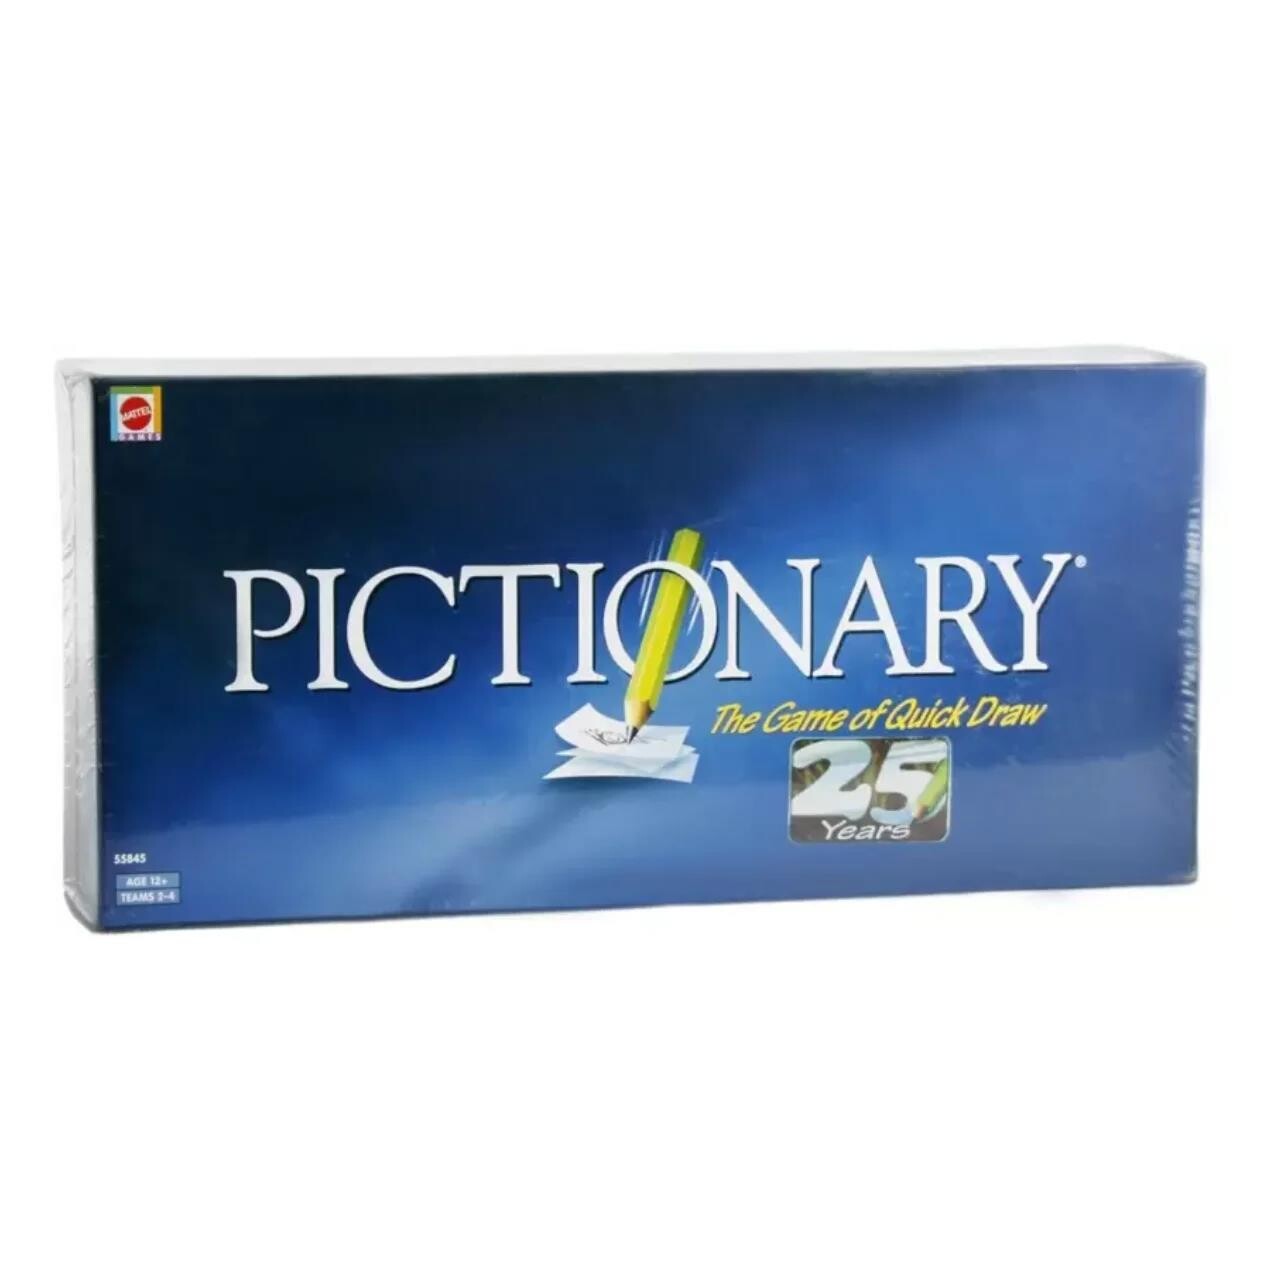 WELCOME MATTEL PICTIONARY ADULT CLASSIC GAME 55845